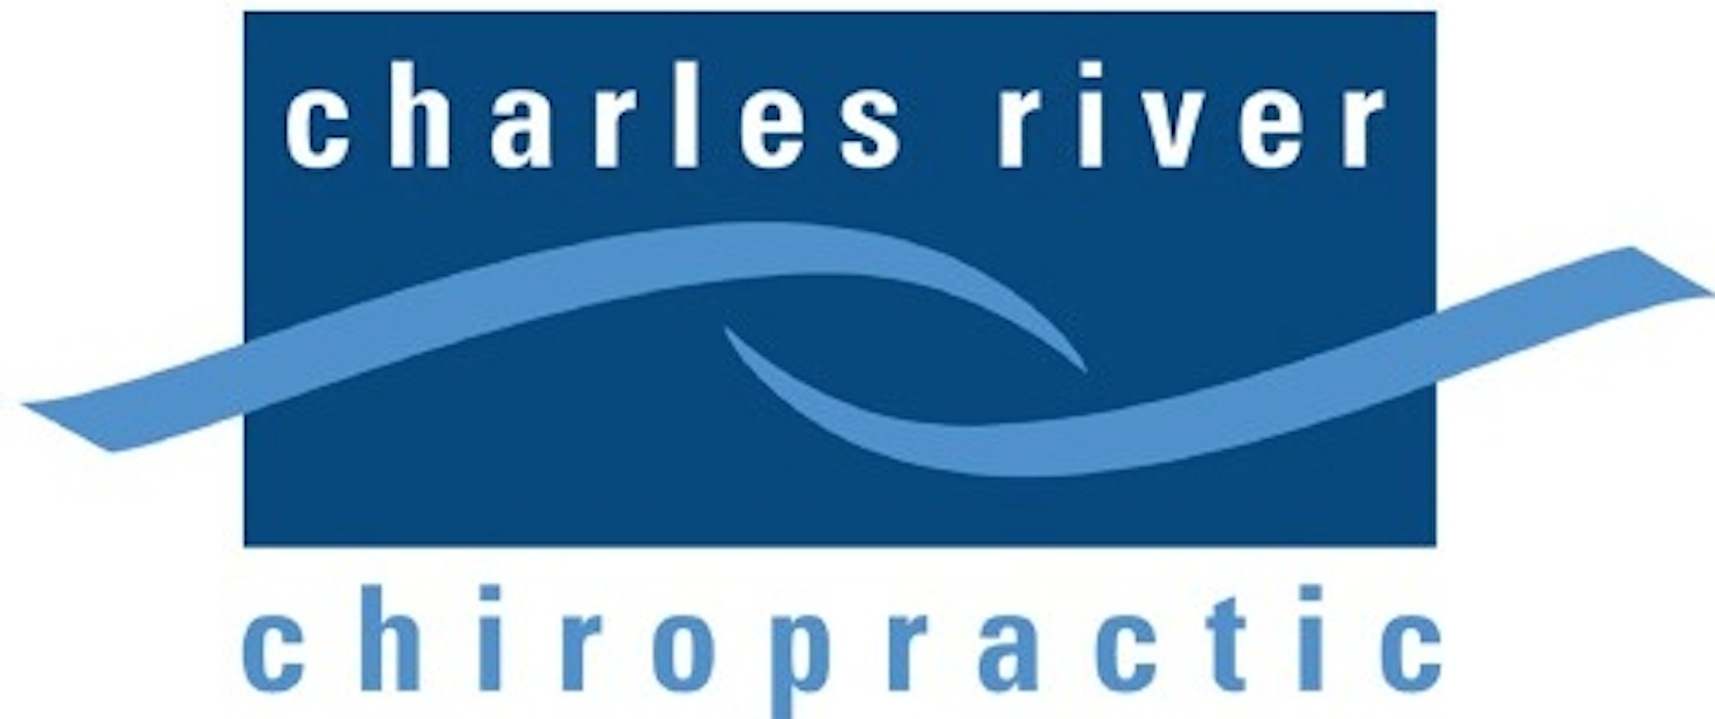 Charles River Chiropractic